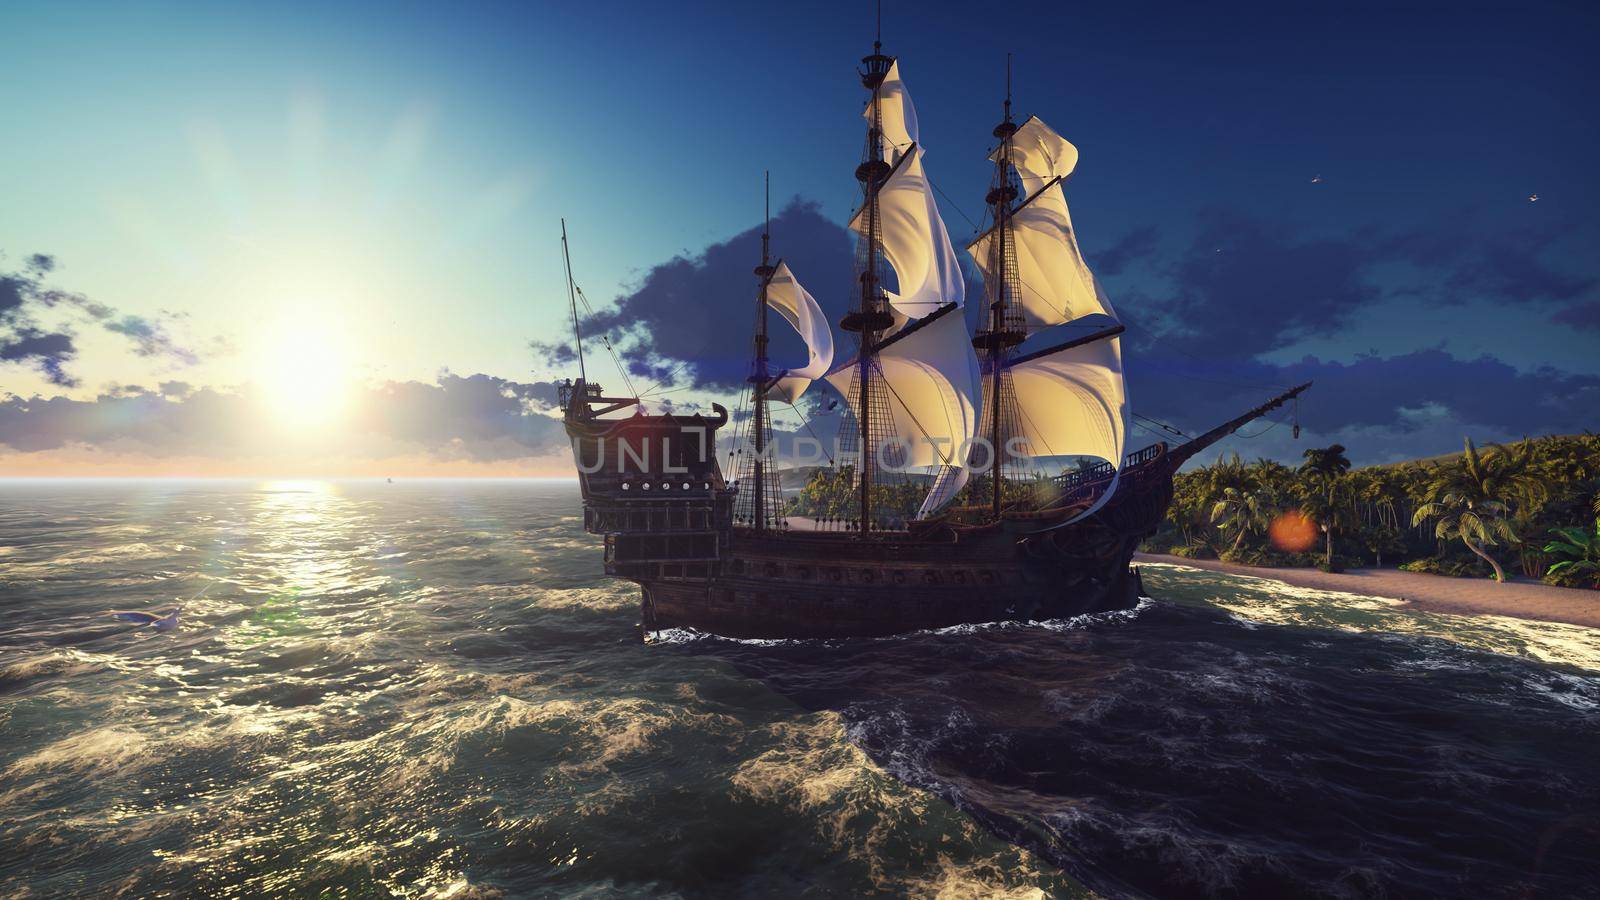 A large medieval ship in the ocean at sunset. An ancient medieval ship docked near a deserted tropical island.